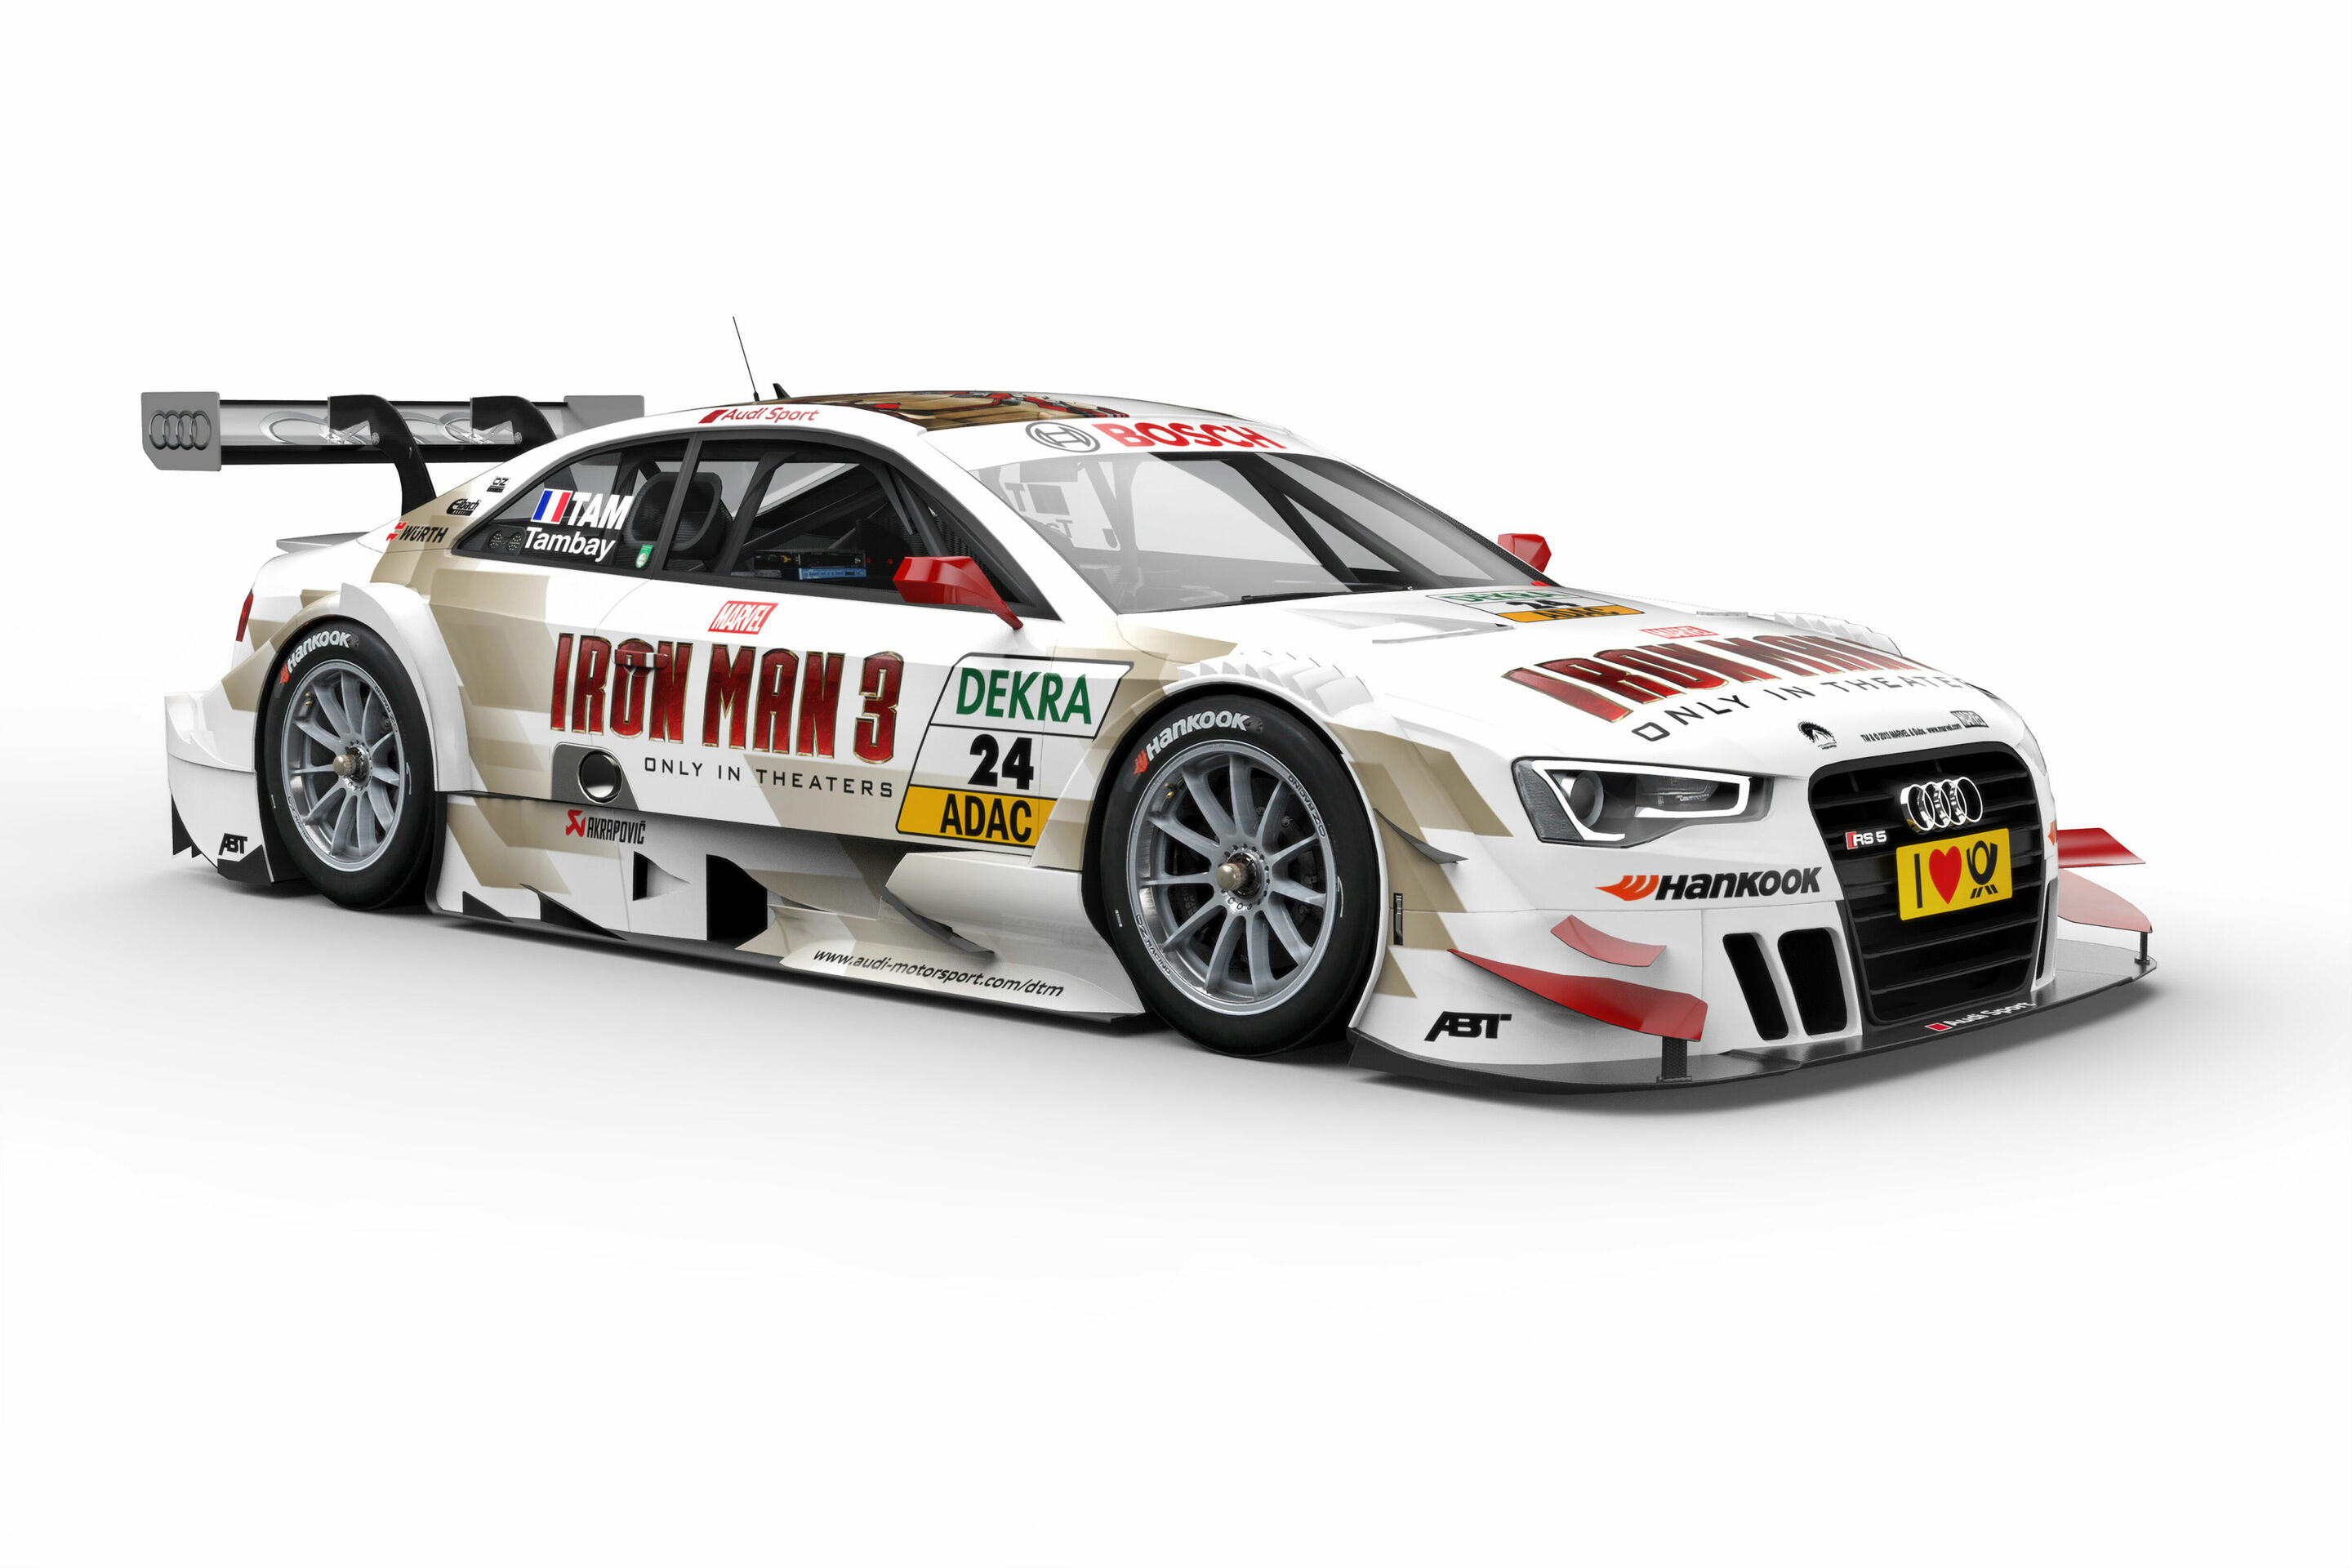 Iron Man 3: spectacular graphics on the RS 5 DTM of Adrien Tambay